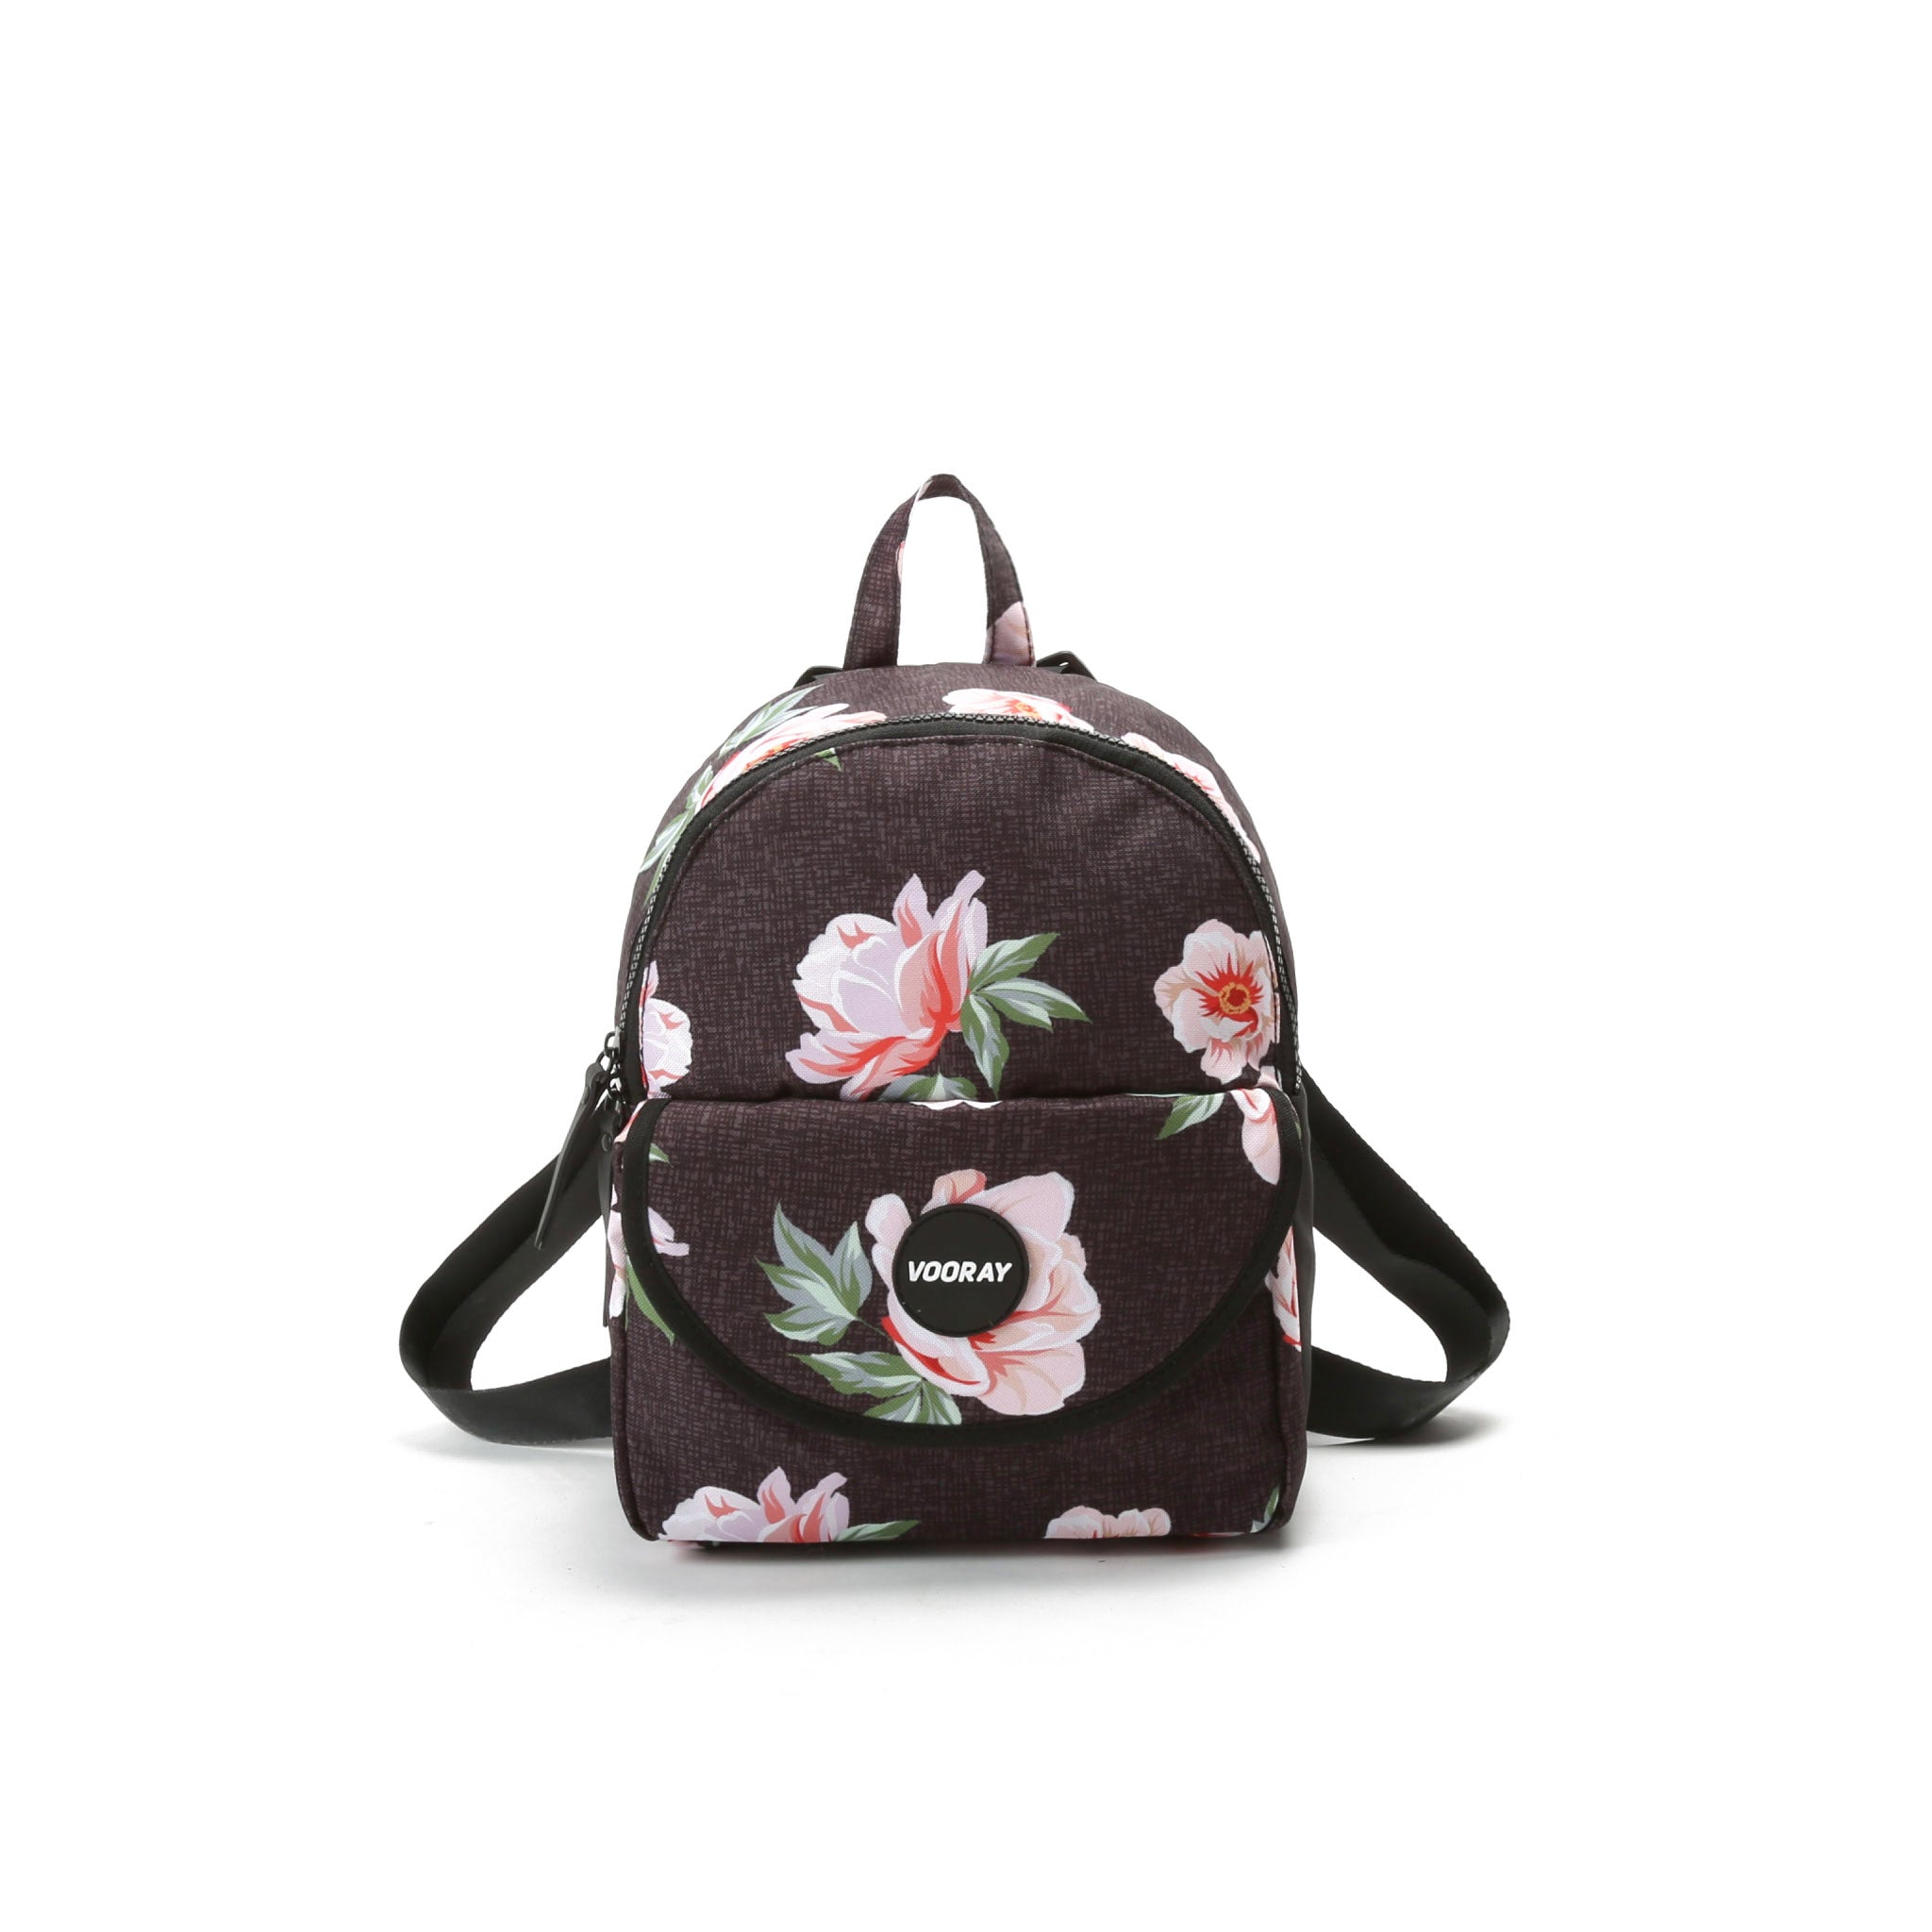 Vooray Lexi Small Backpack - Dagrugzak